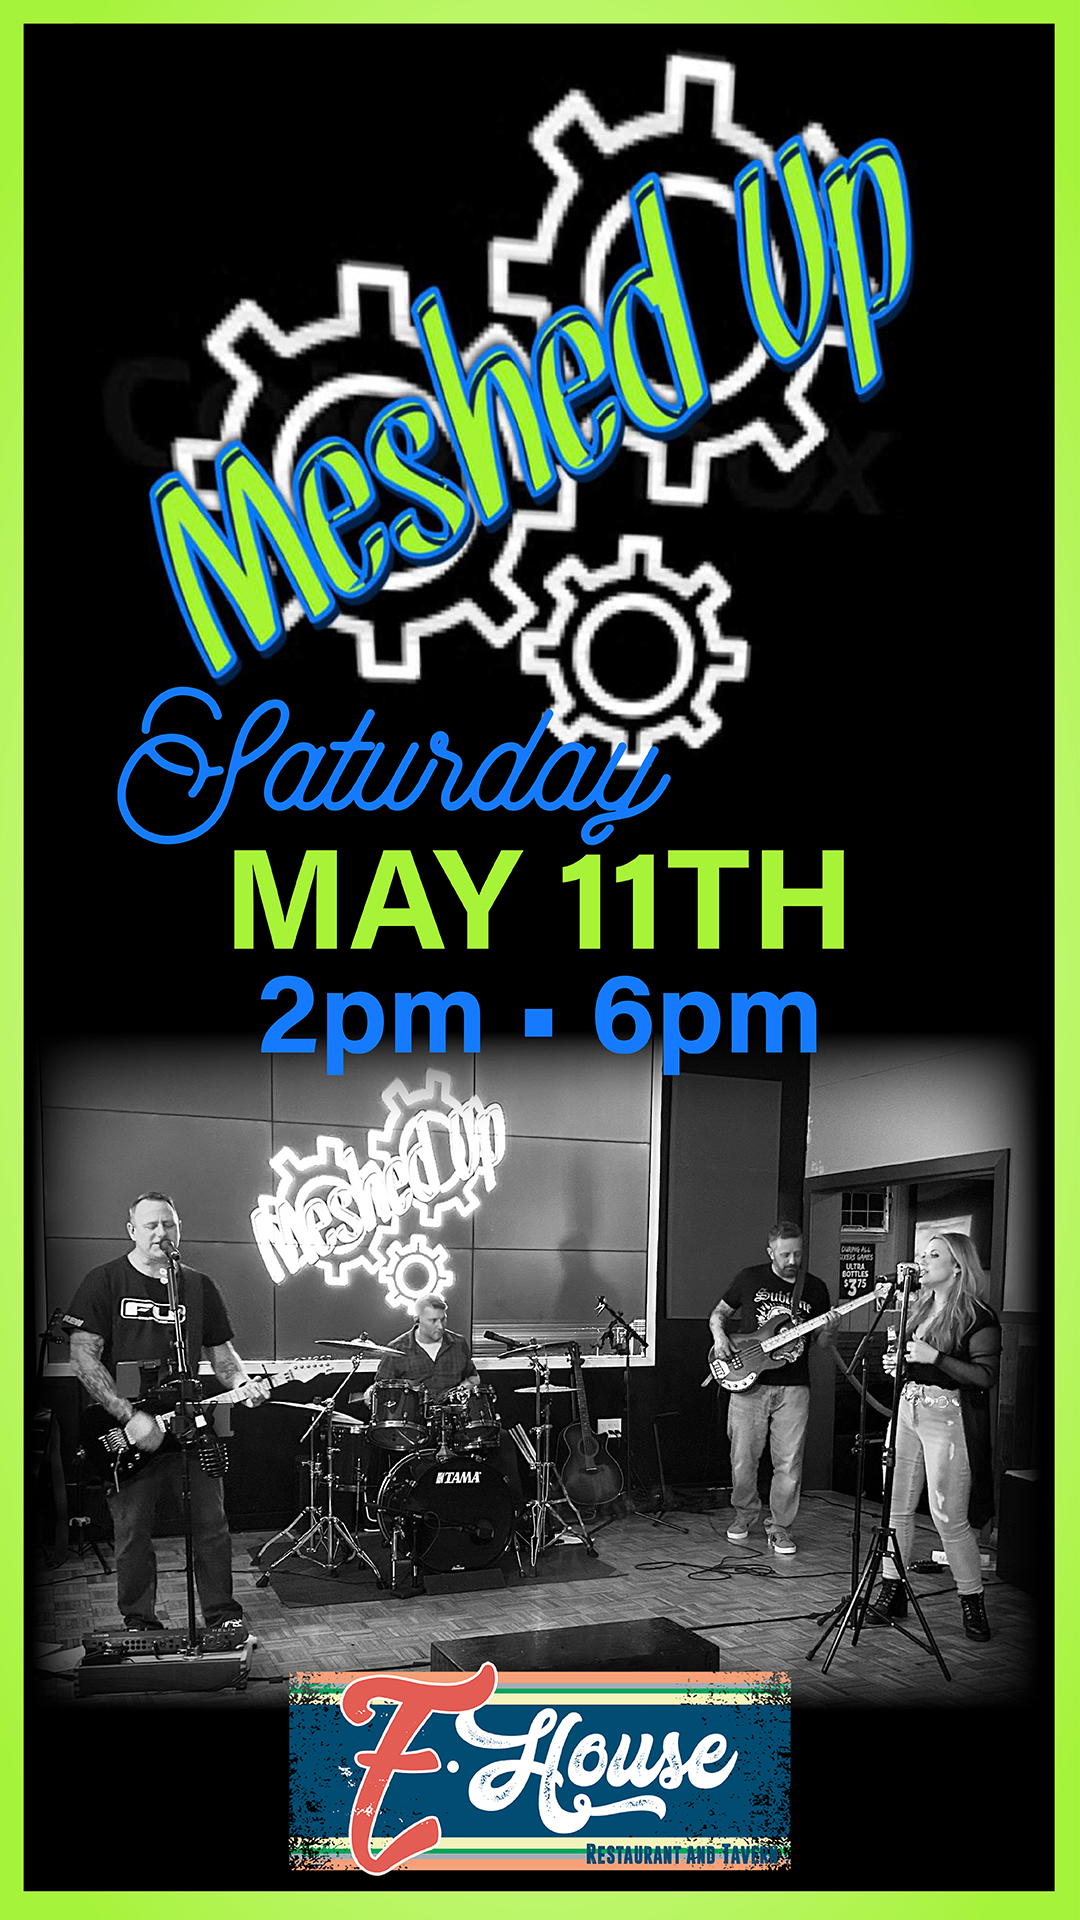 Promotional poster for meshed up band's live performance on may 11th from 2 pm to 6 pm, featuring the band members playing onstage, styled in monochrome with neon blue accents.